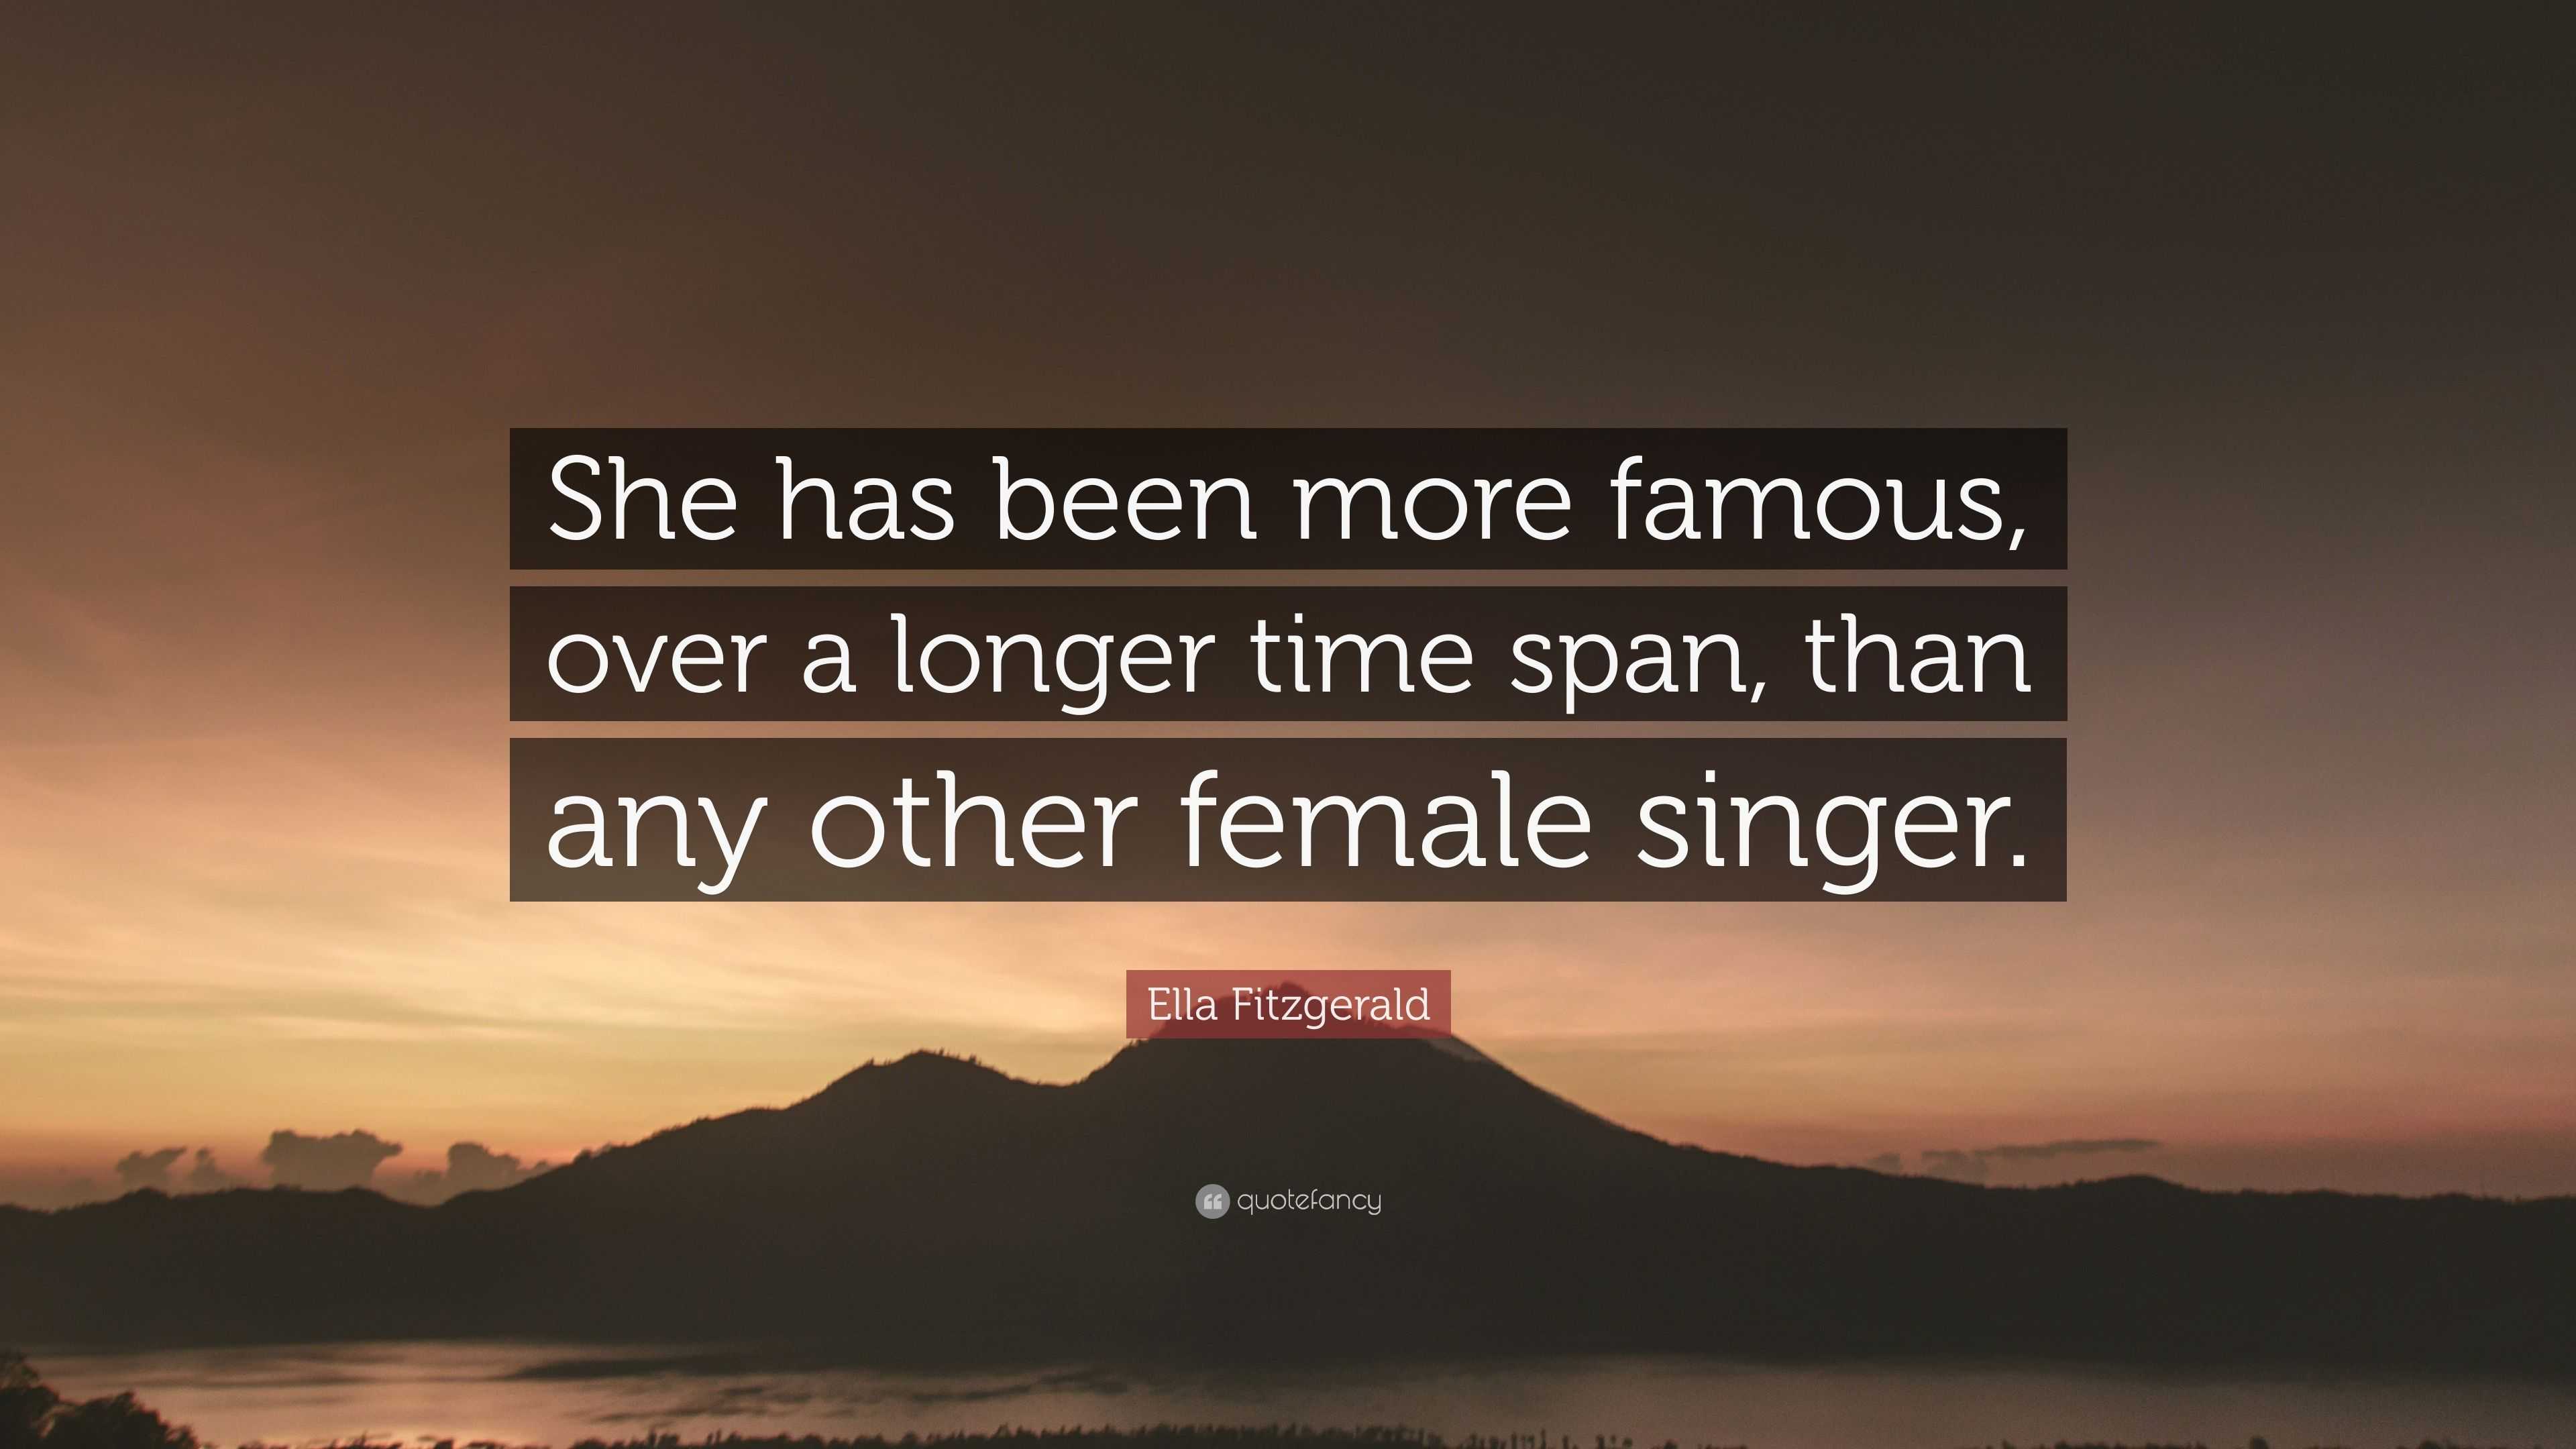 Ella Fitzgerald Quote: “She has been more famous, over a longer time ...